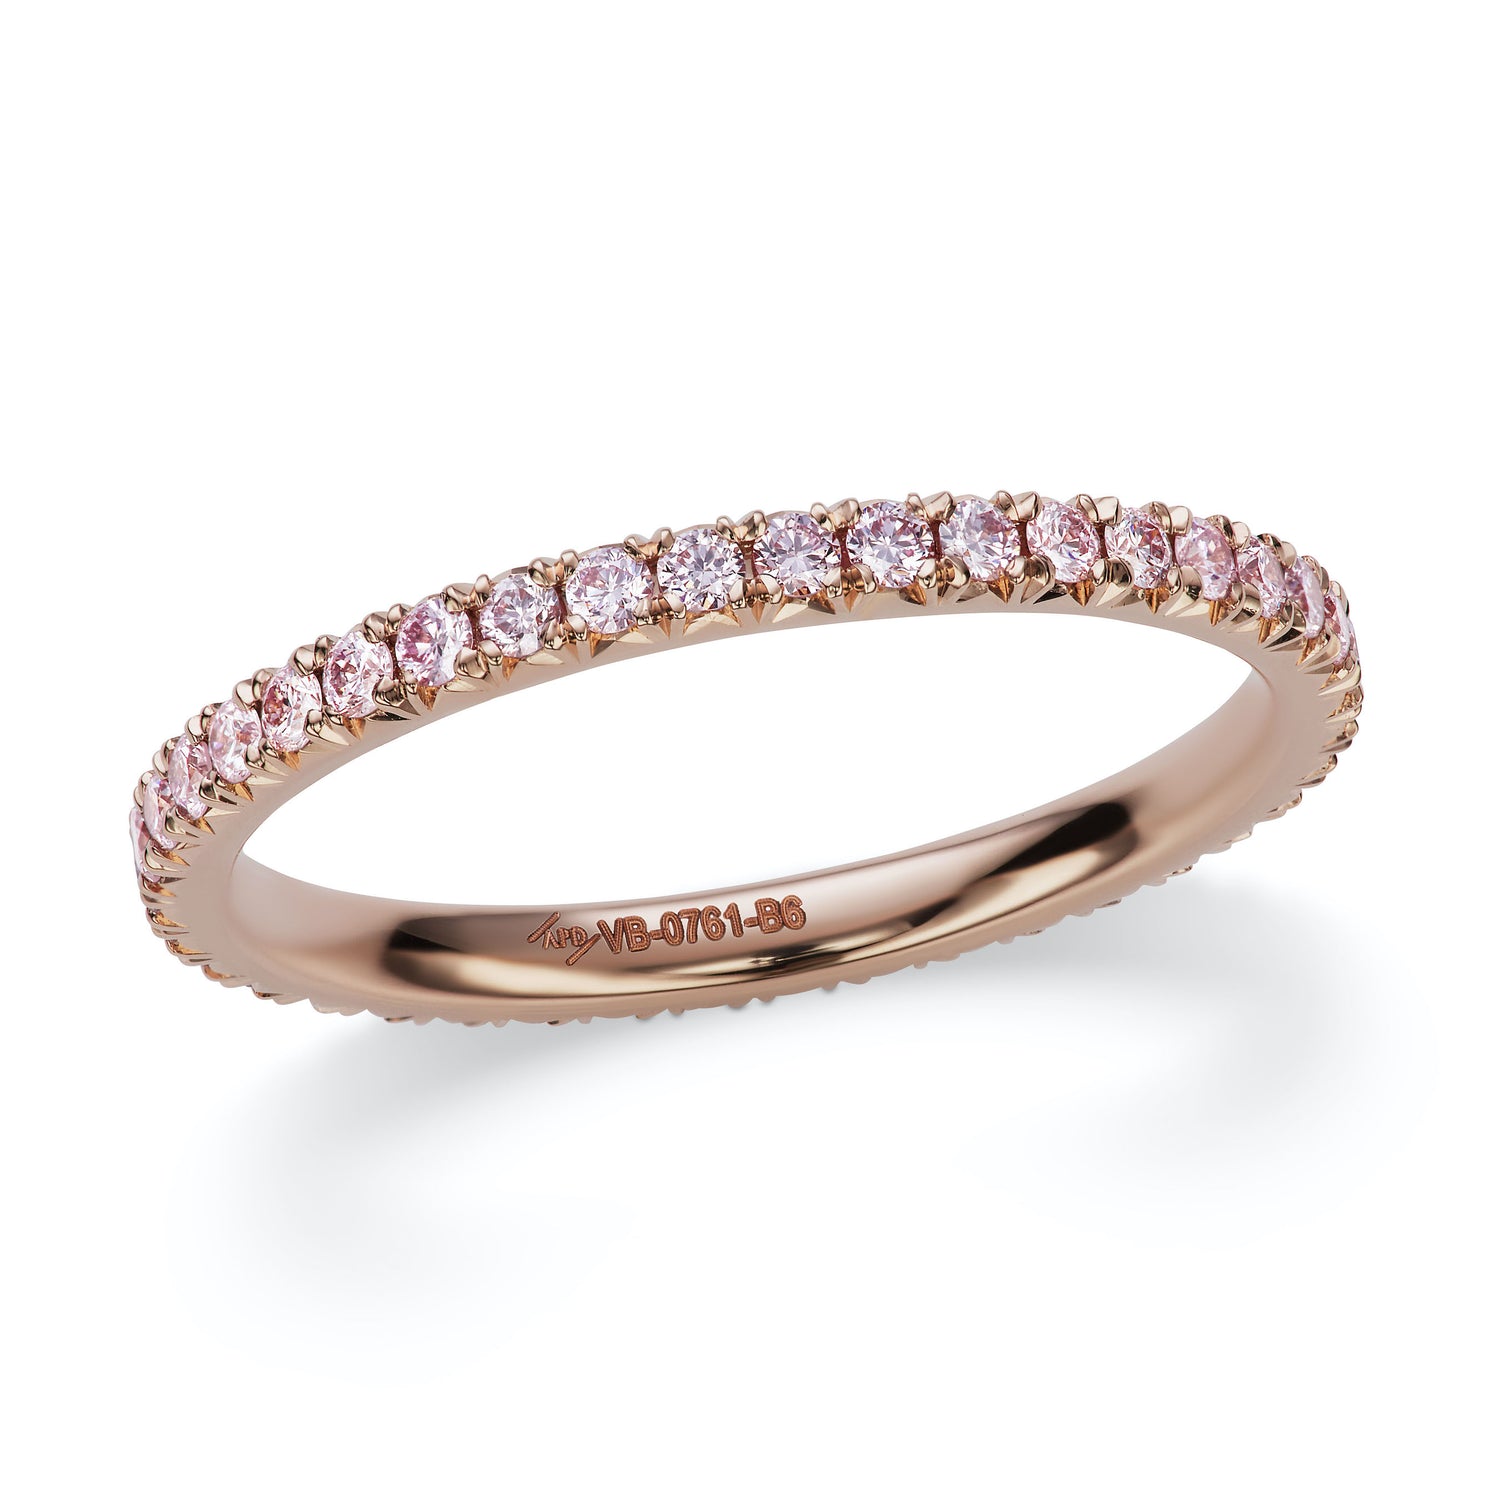 Close up of the Pink Diamond French Pave Eternity Ring. Featuring certified argyle pink diamonds set in 18k rose gold. 